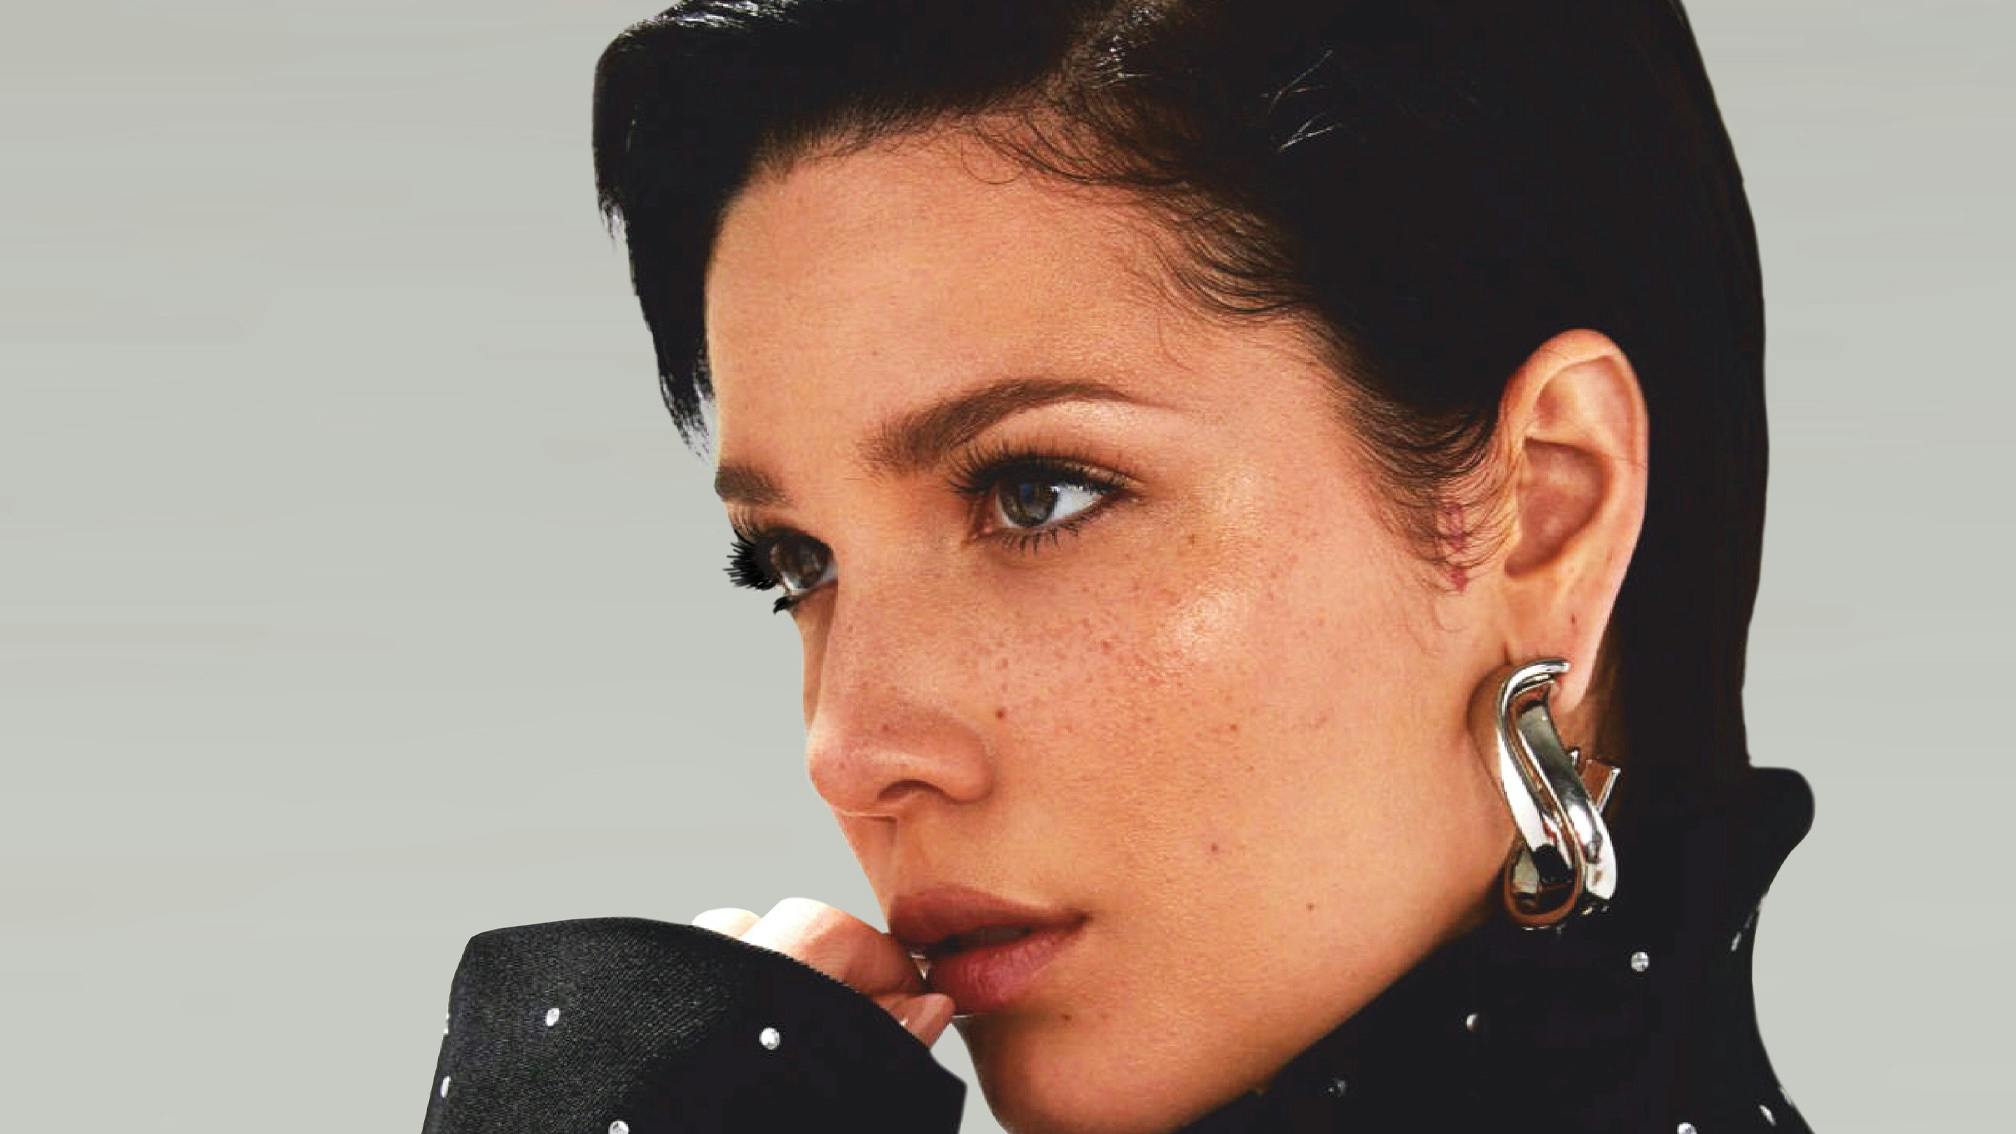 Halsey shares extended album featuring Nine Inch Nails cover of Nightmare